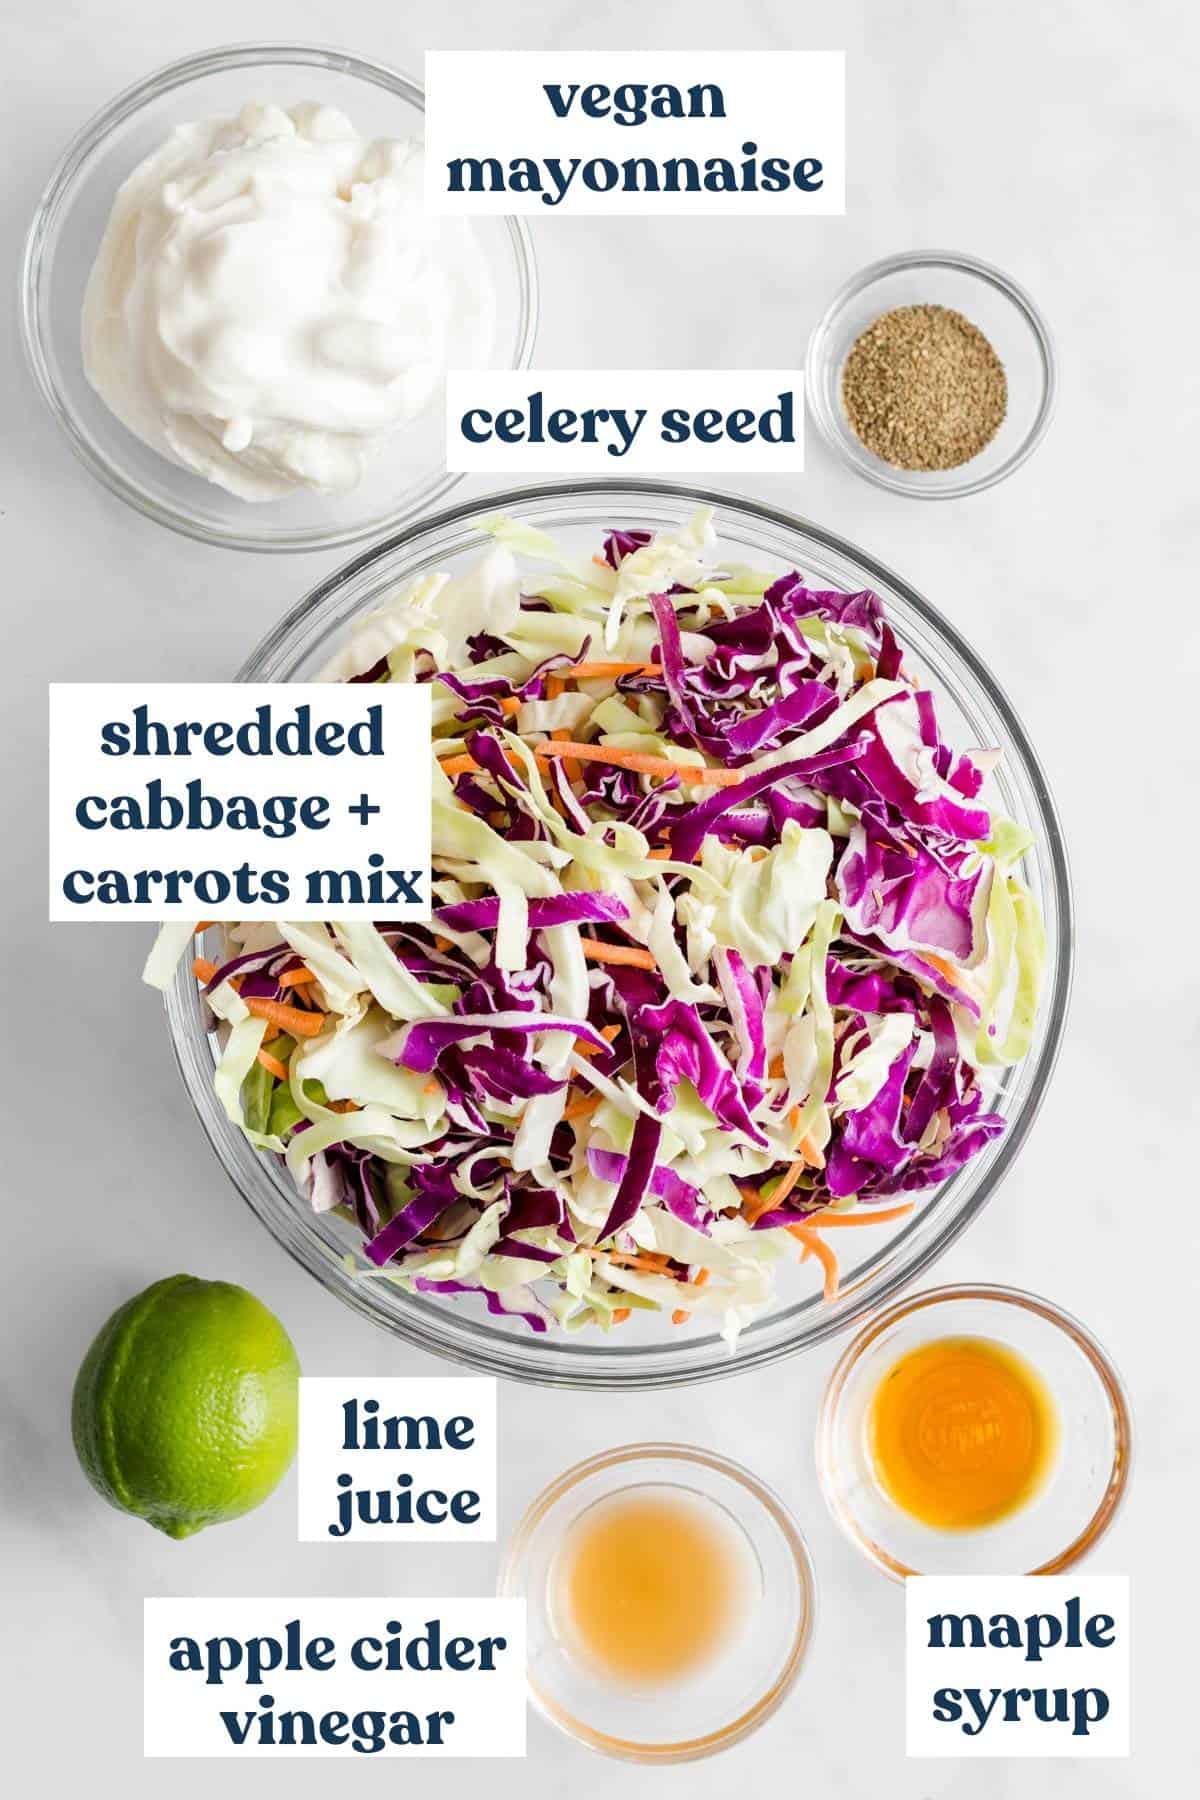 Coleslaw dressing ingredients measured and labeled on white background.